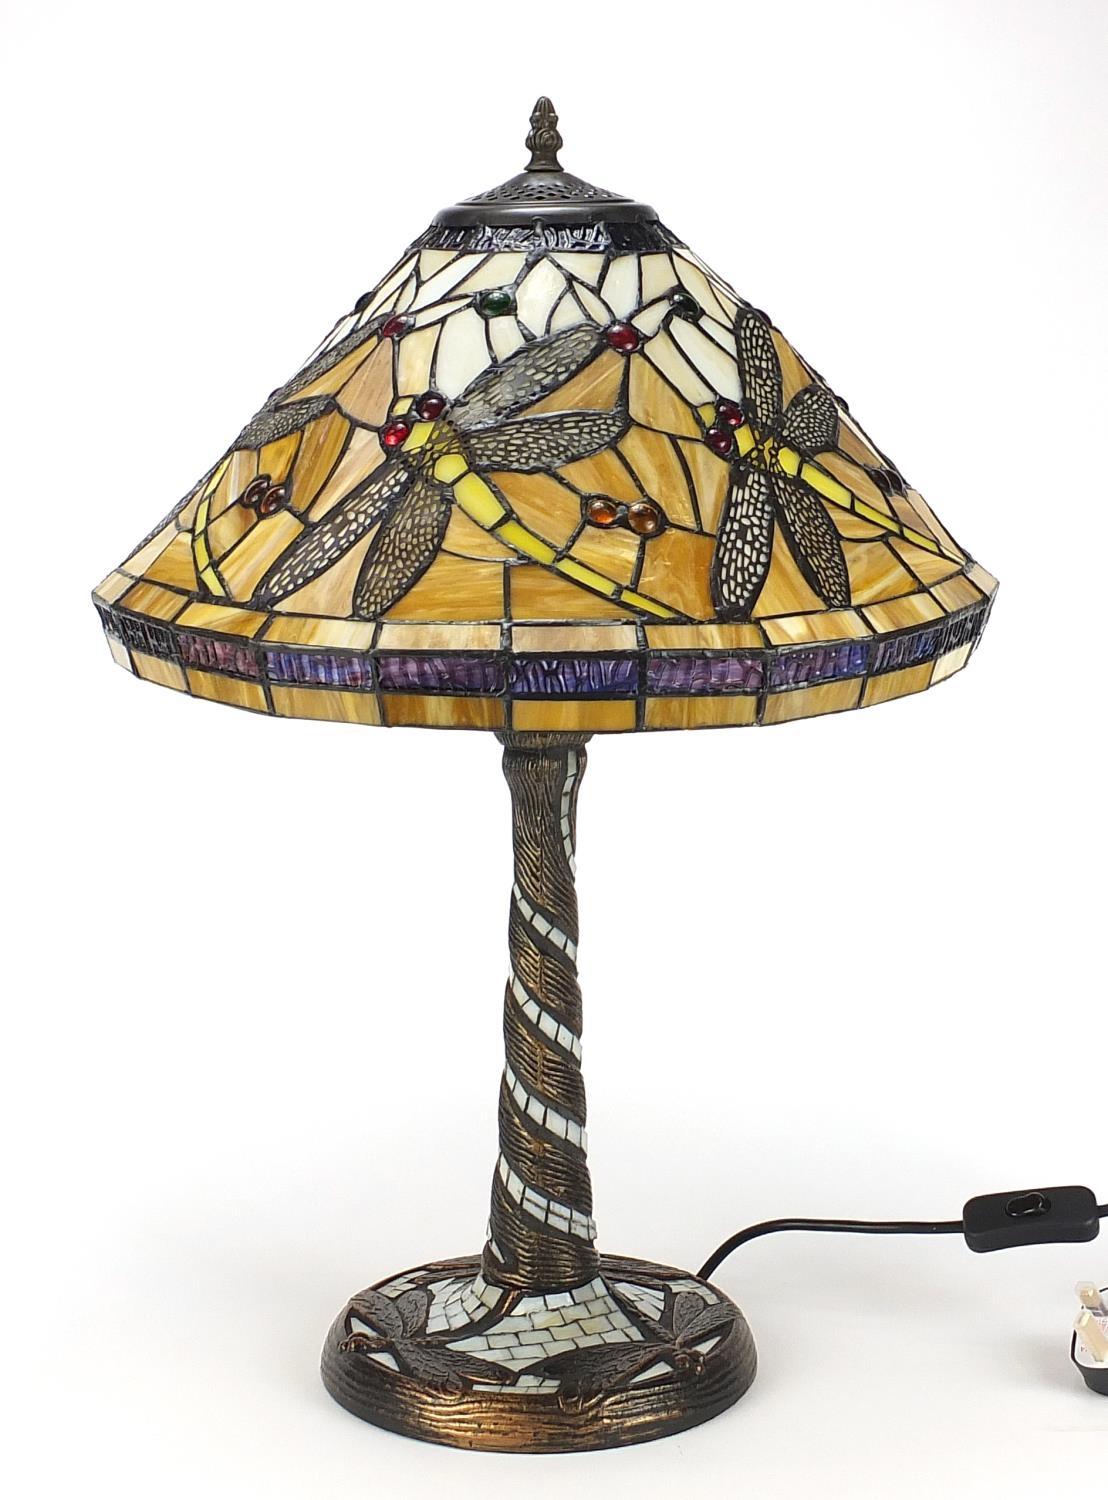 Tiffany design dragonfly table lamp with shade, 58cm high